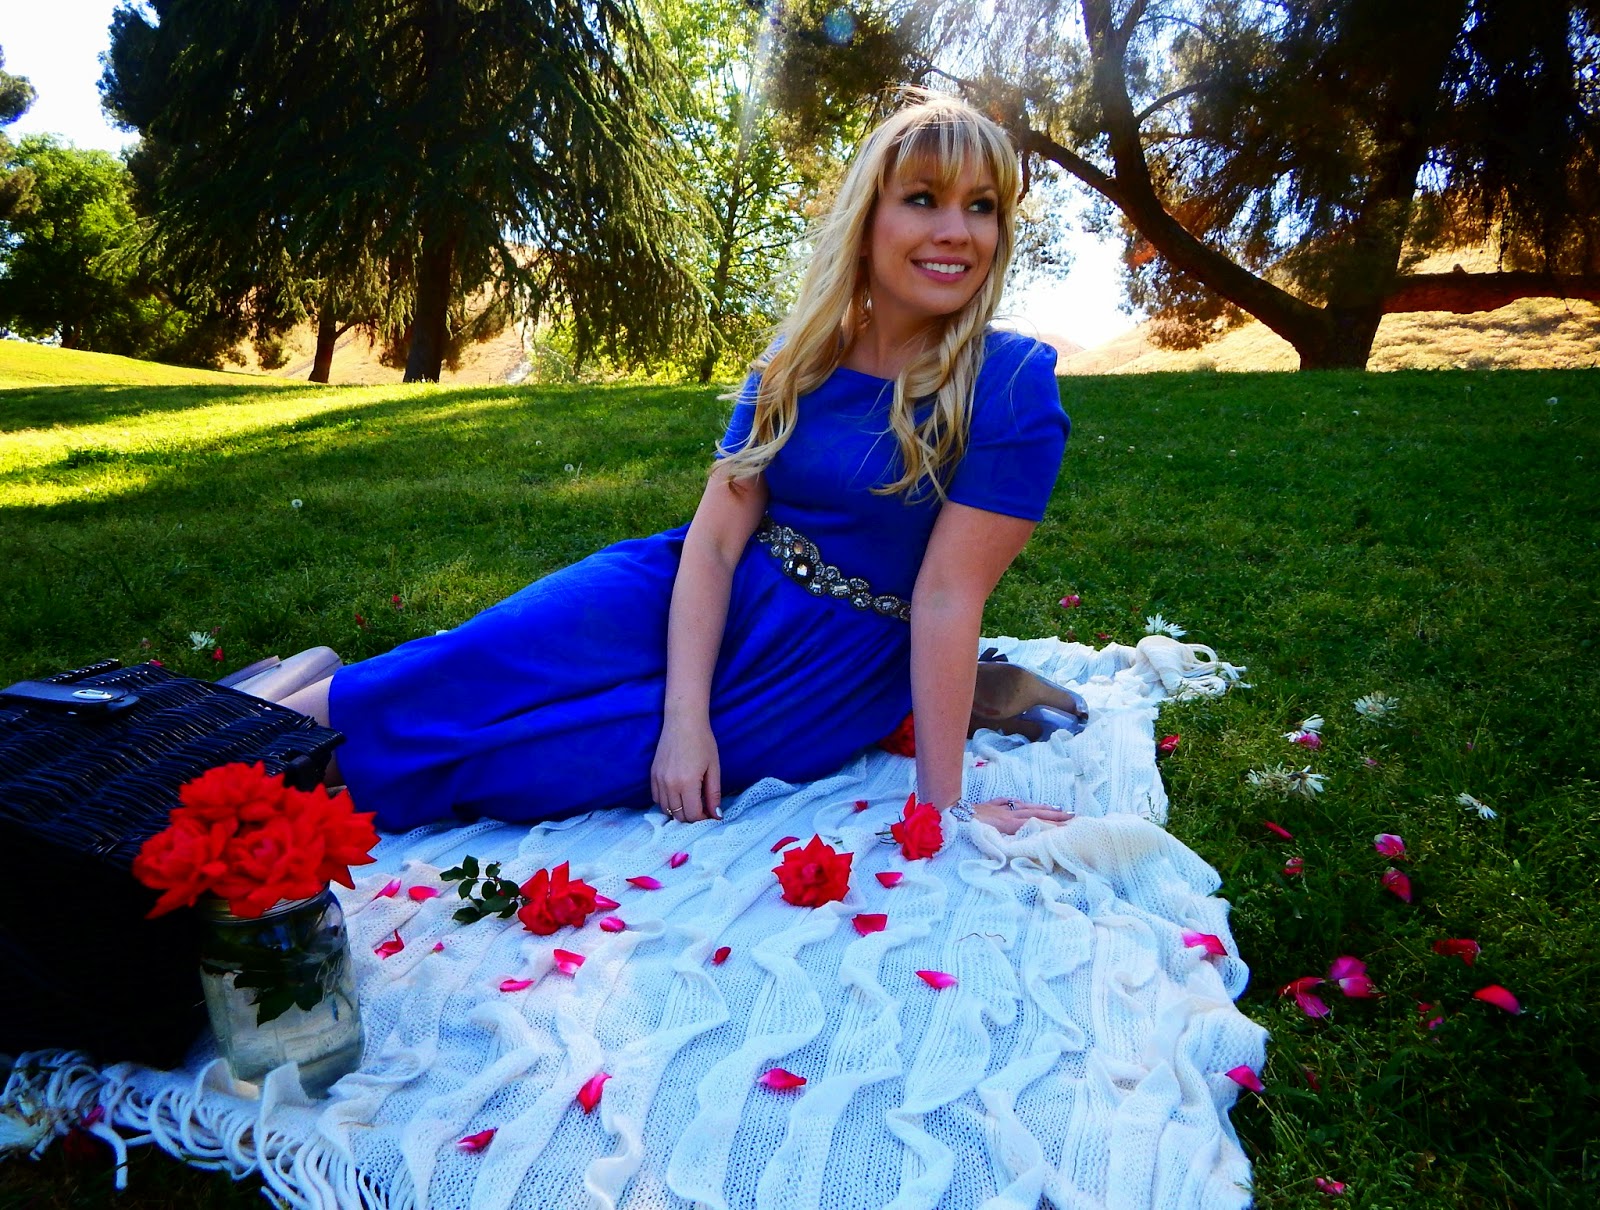 Why I Stopped Being a Lularoe Consultant by popular California fashion blogger Lizzie in Lace